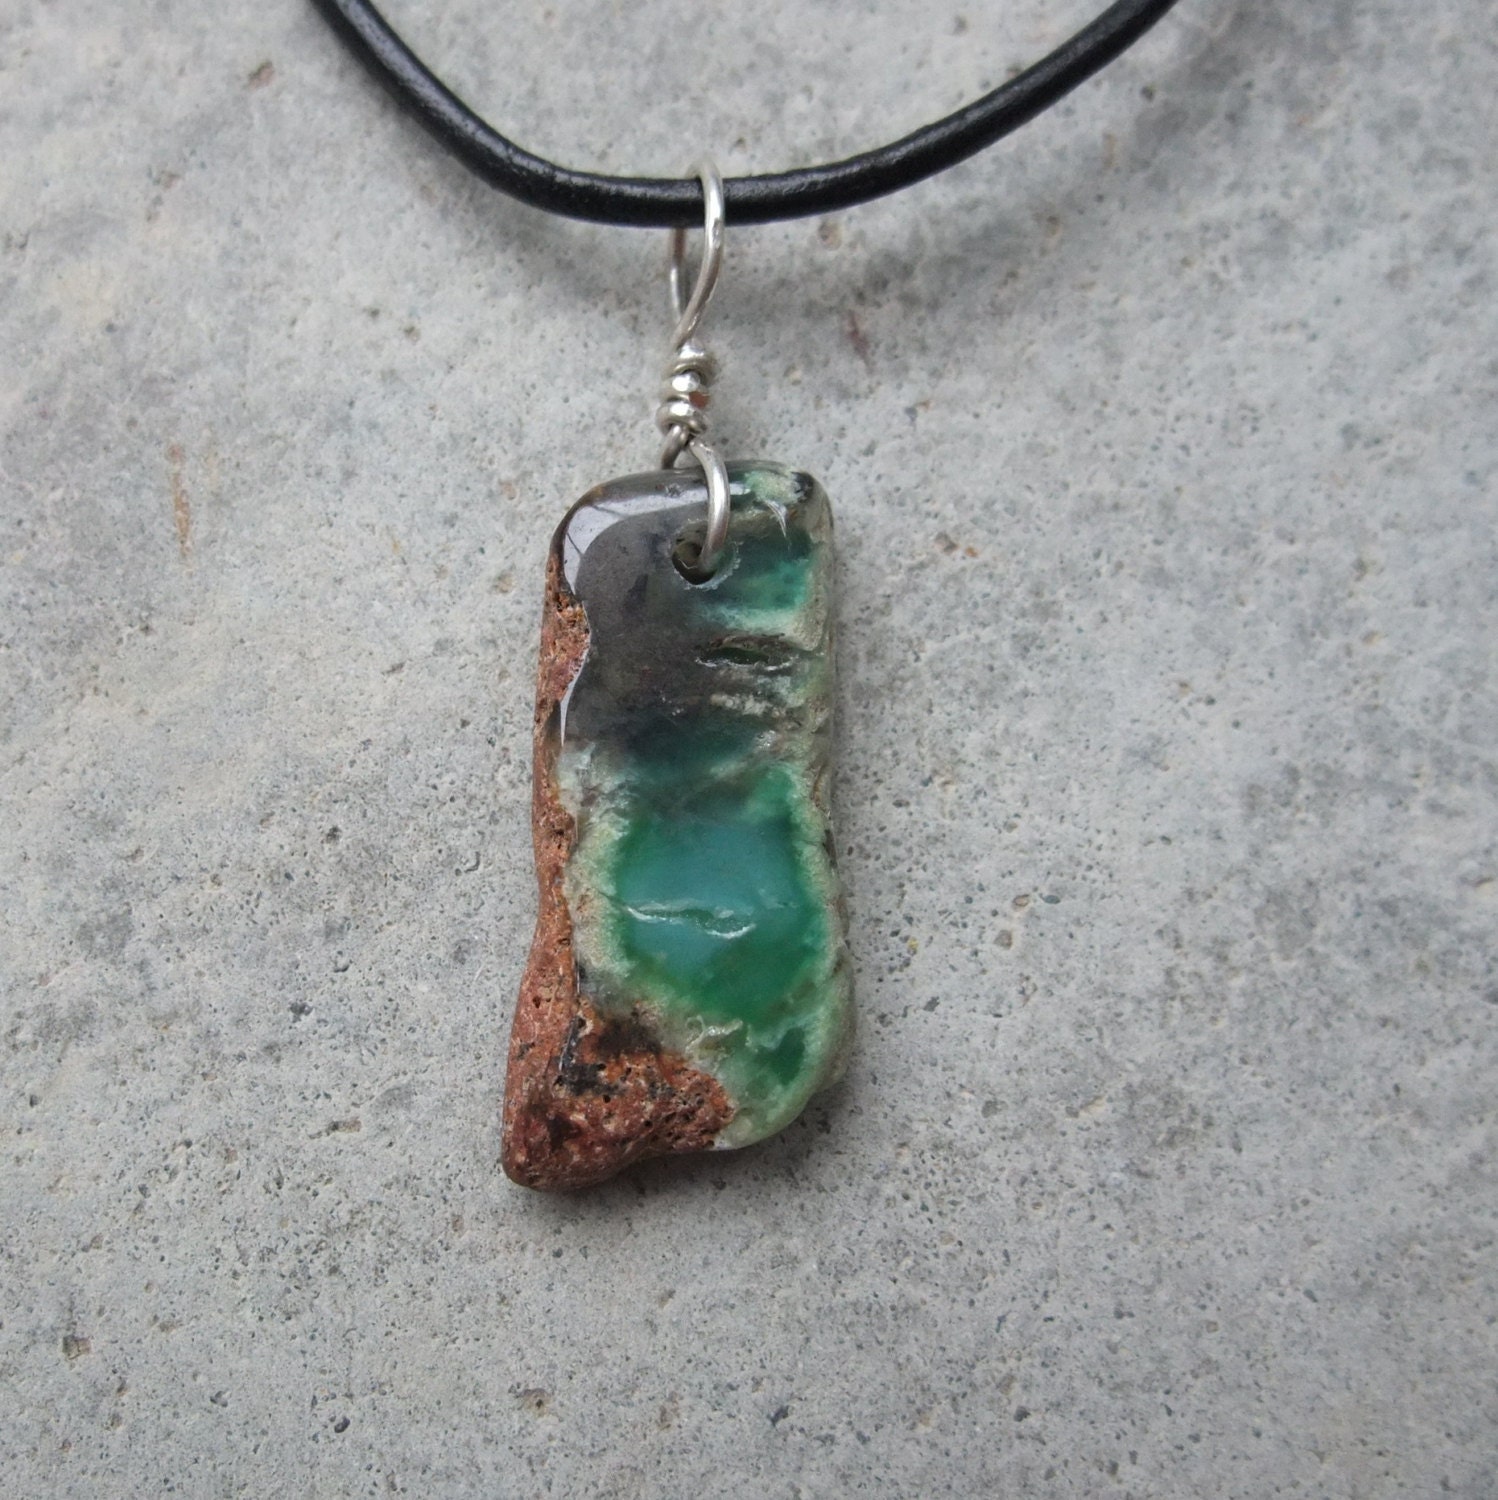 Chrysoprase pendant necklace handmade & naturally sourced in